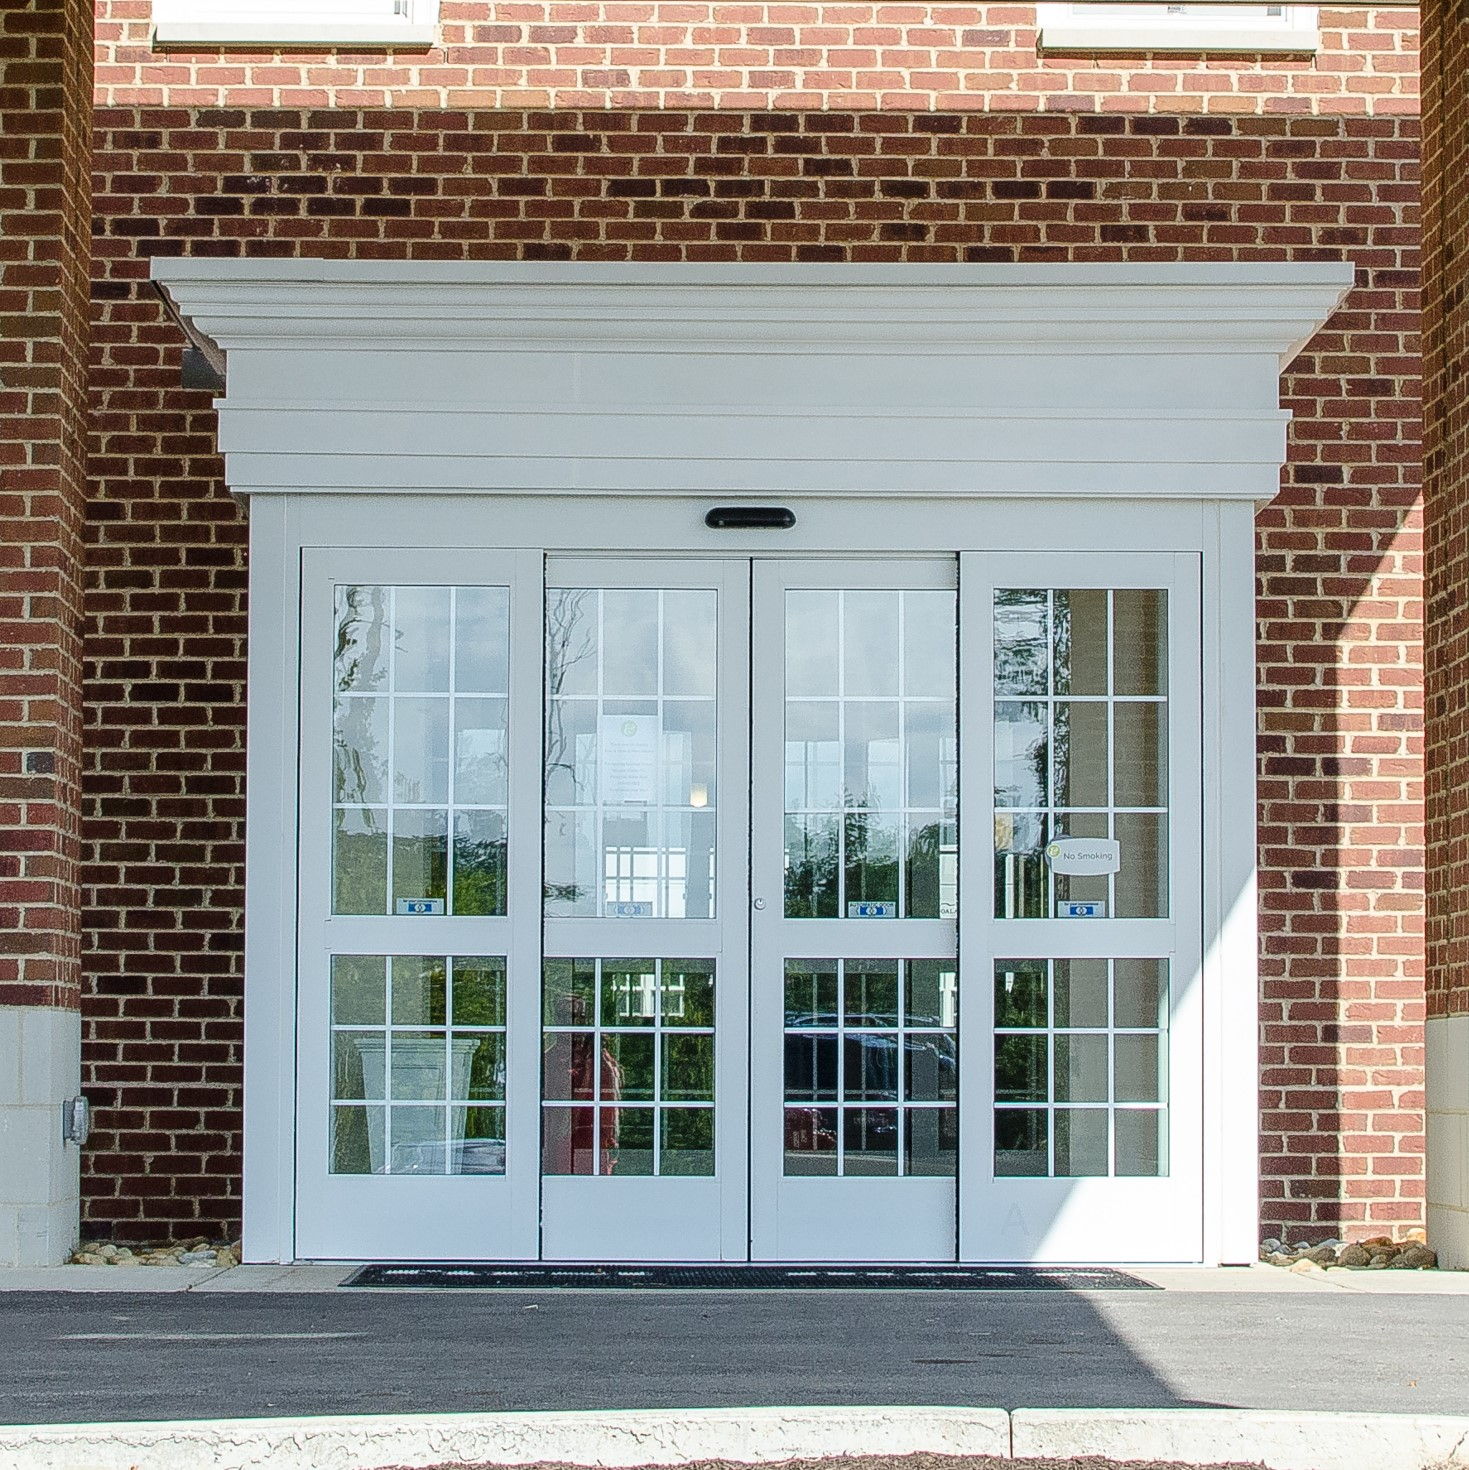 Photo of a new automatic sliding door in a brick building